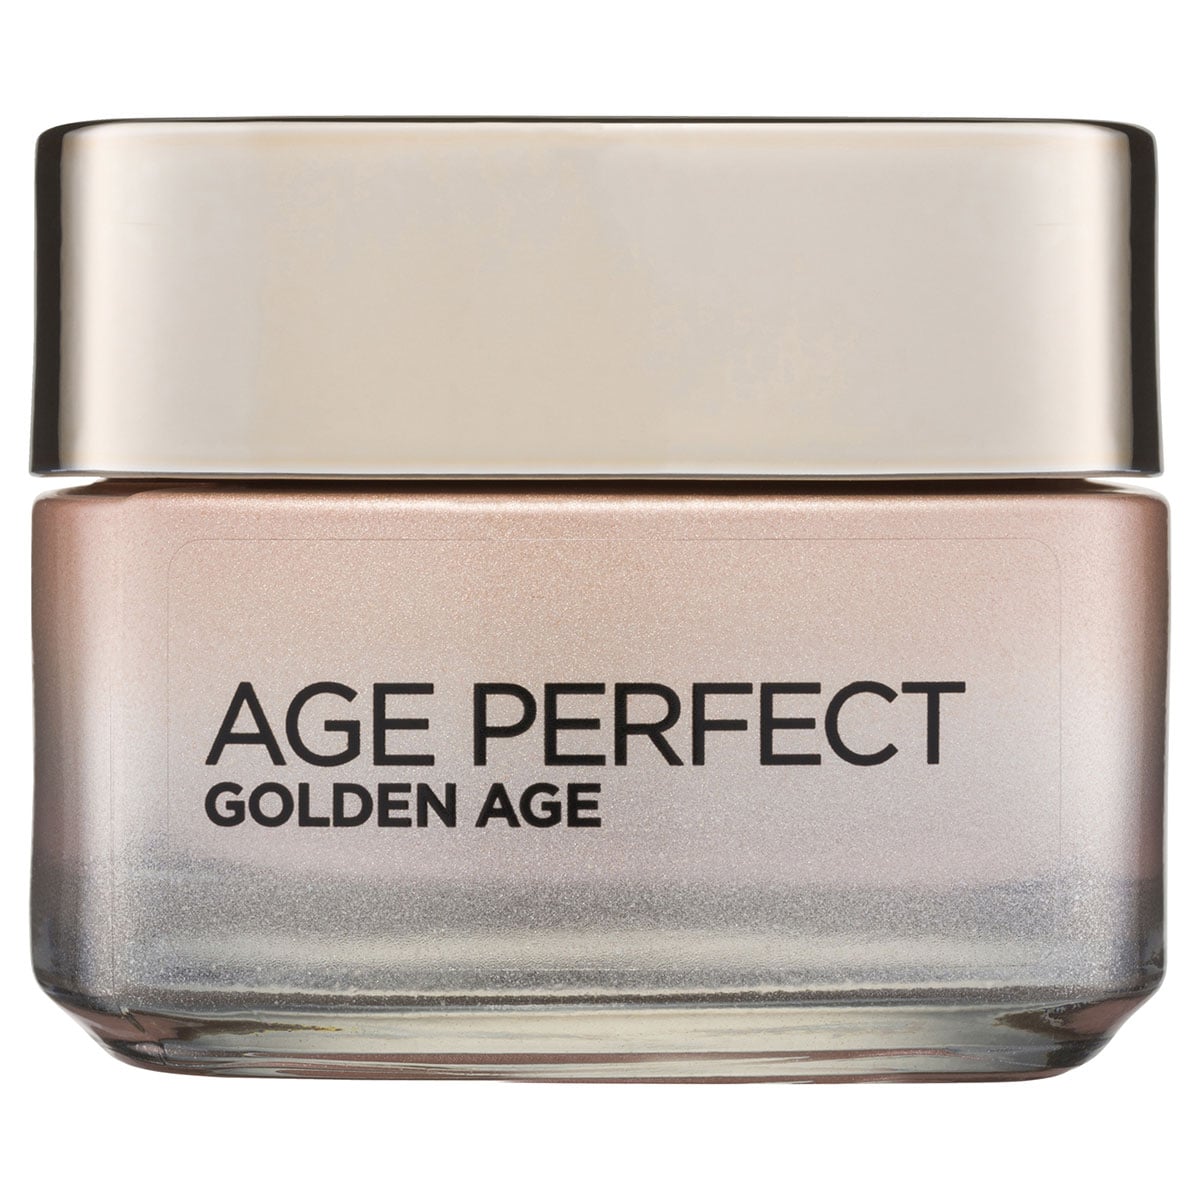 L'Oreal Age Perfect Golden Age Rosy Re-Densifying Day Cream 50ml